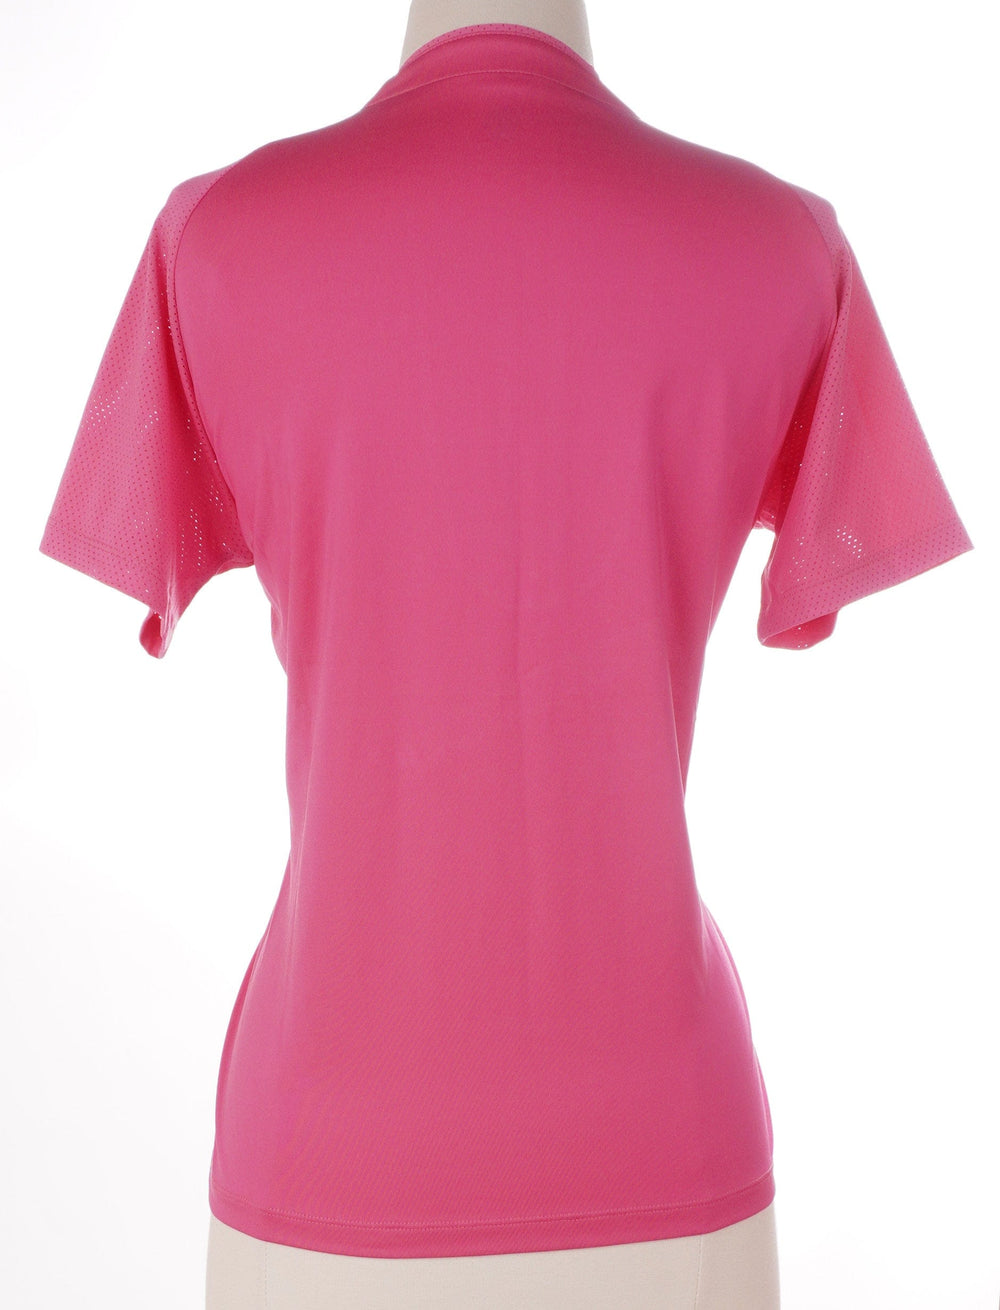 Tail Pink / Small Tail Short Sleeve Top - Spiced Coral - Size Small